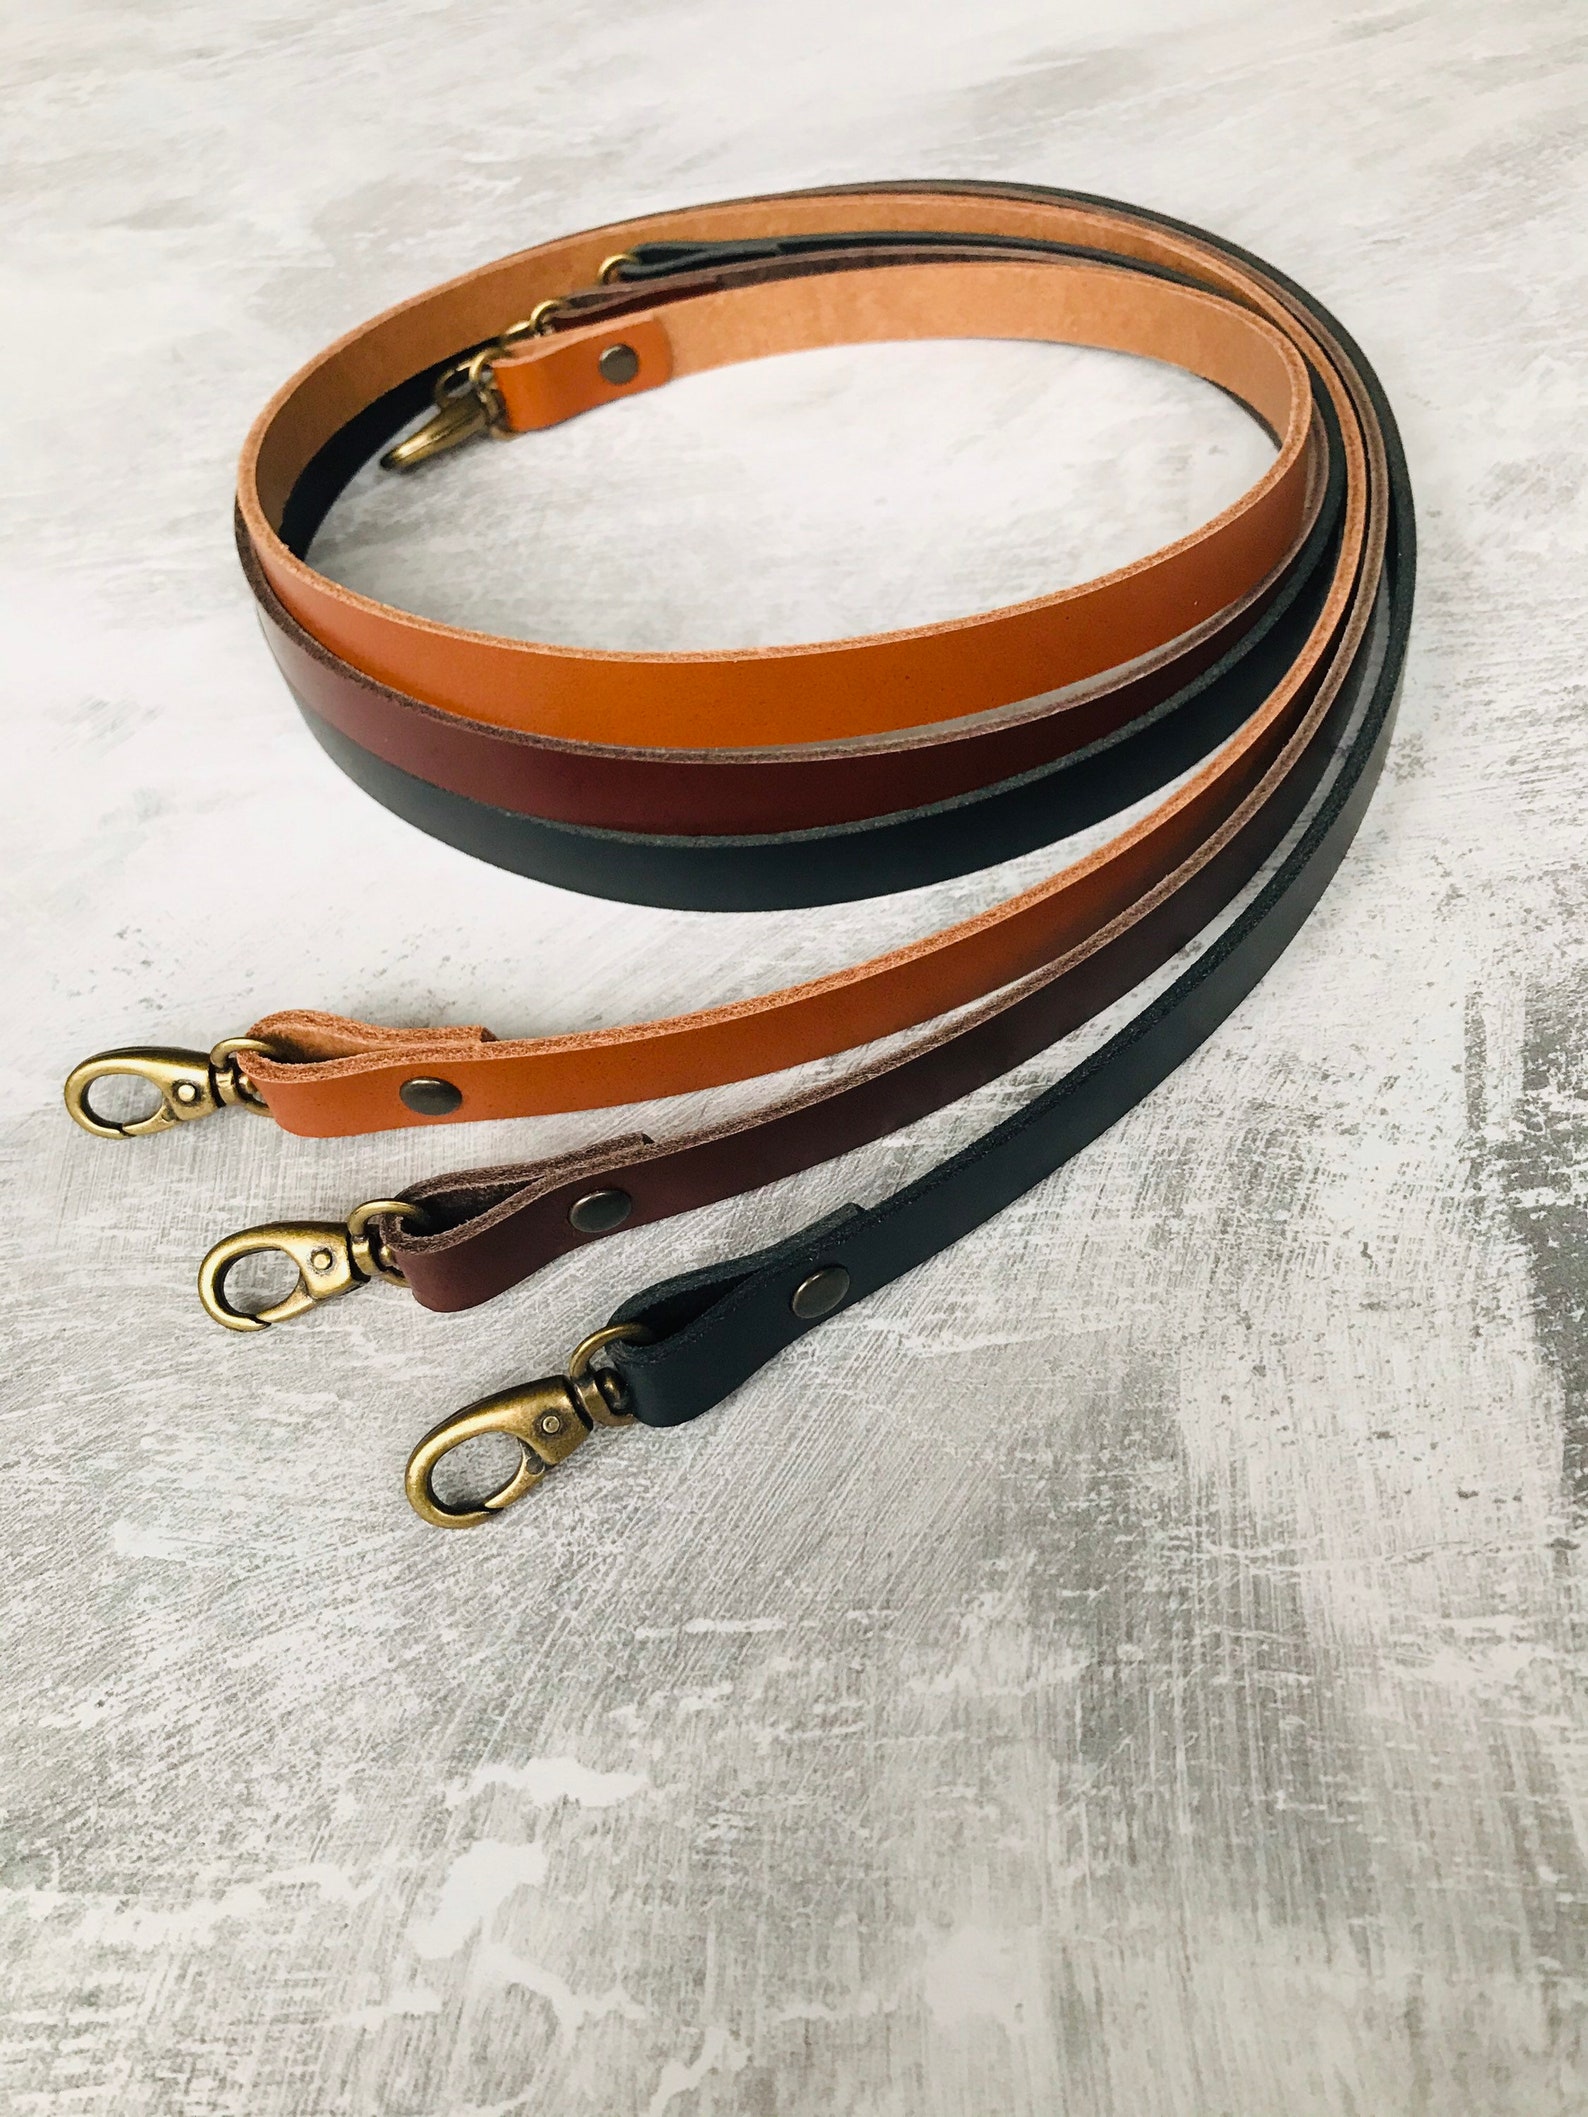 Narrow Handmade Leather Replacement Bag Strap 15mm Wide 2mm - Etsy UK